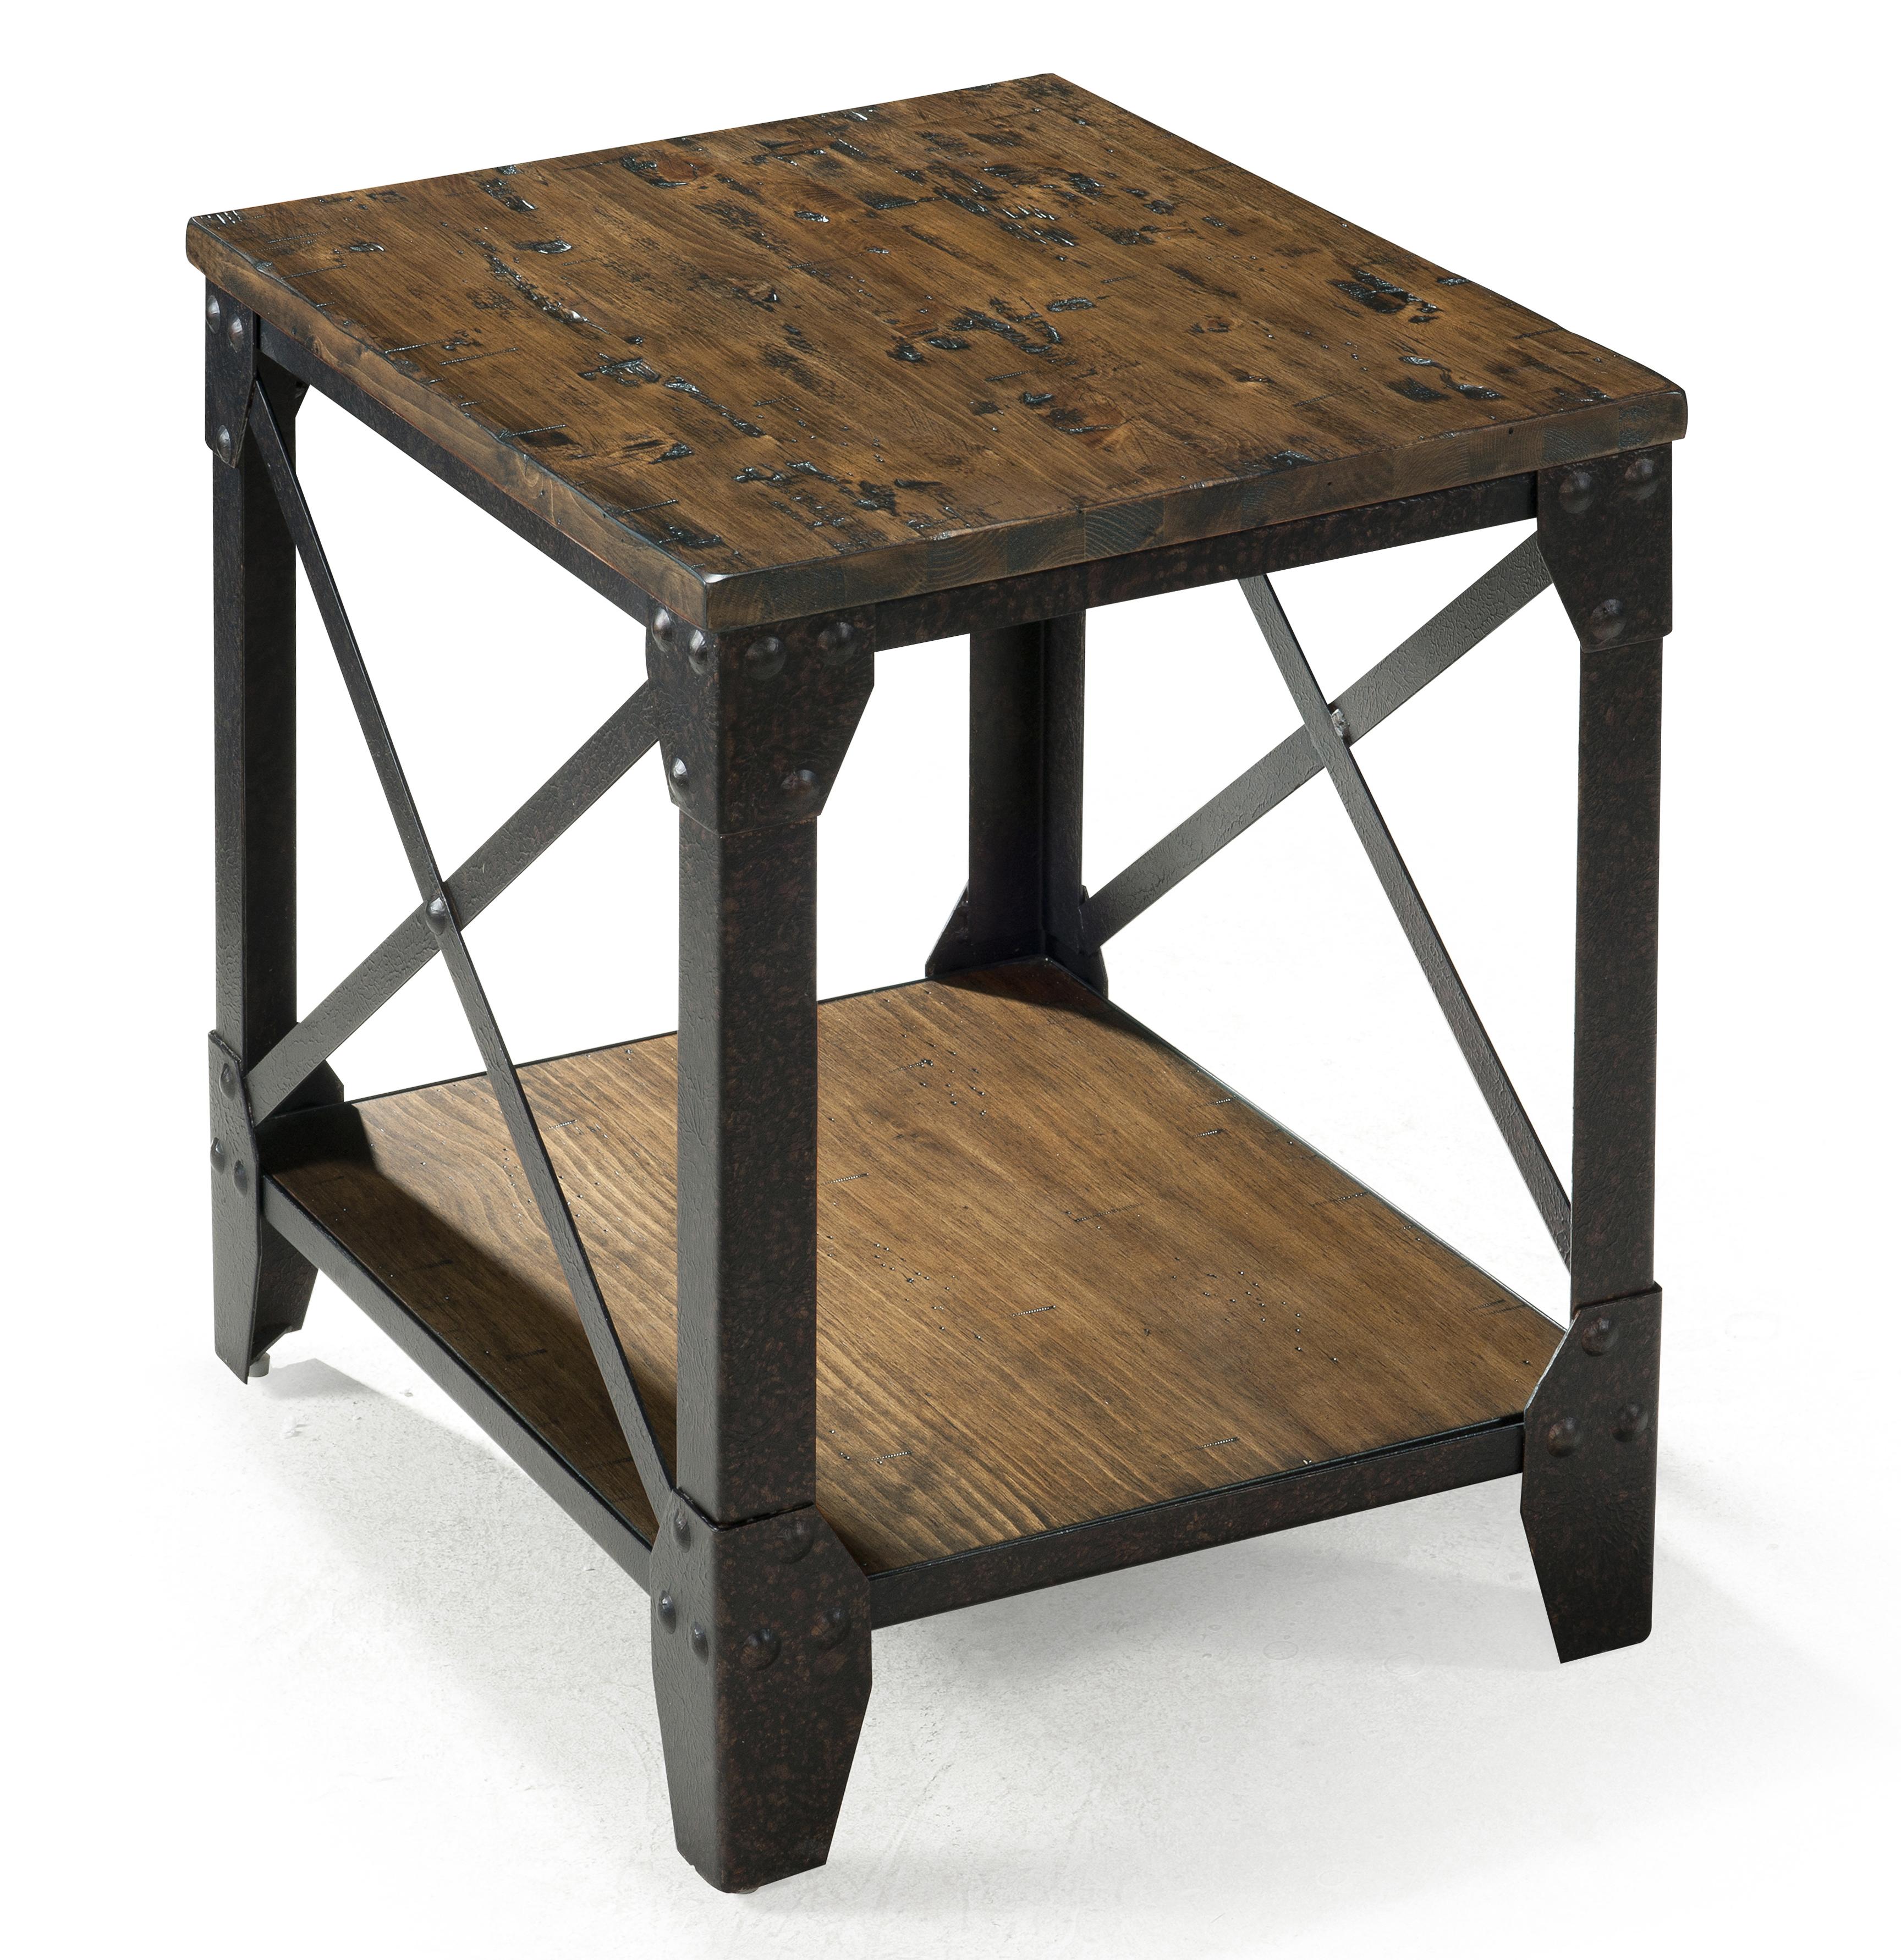 small rectangular end table with rustic iron legs magnussen home products color pinebrook pine accent dresser and changing pedestal transparent furniture keter beer cooler black